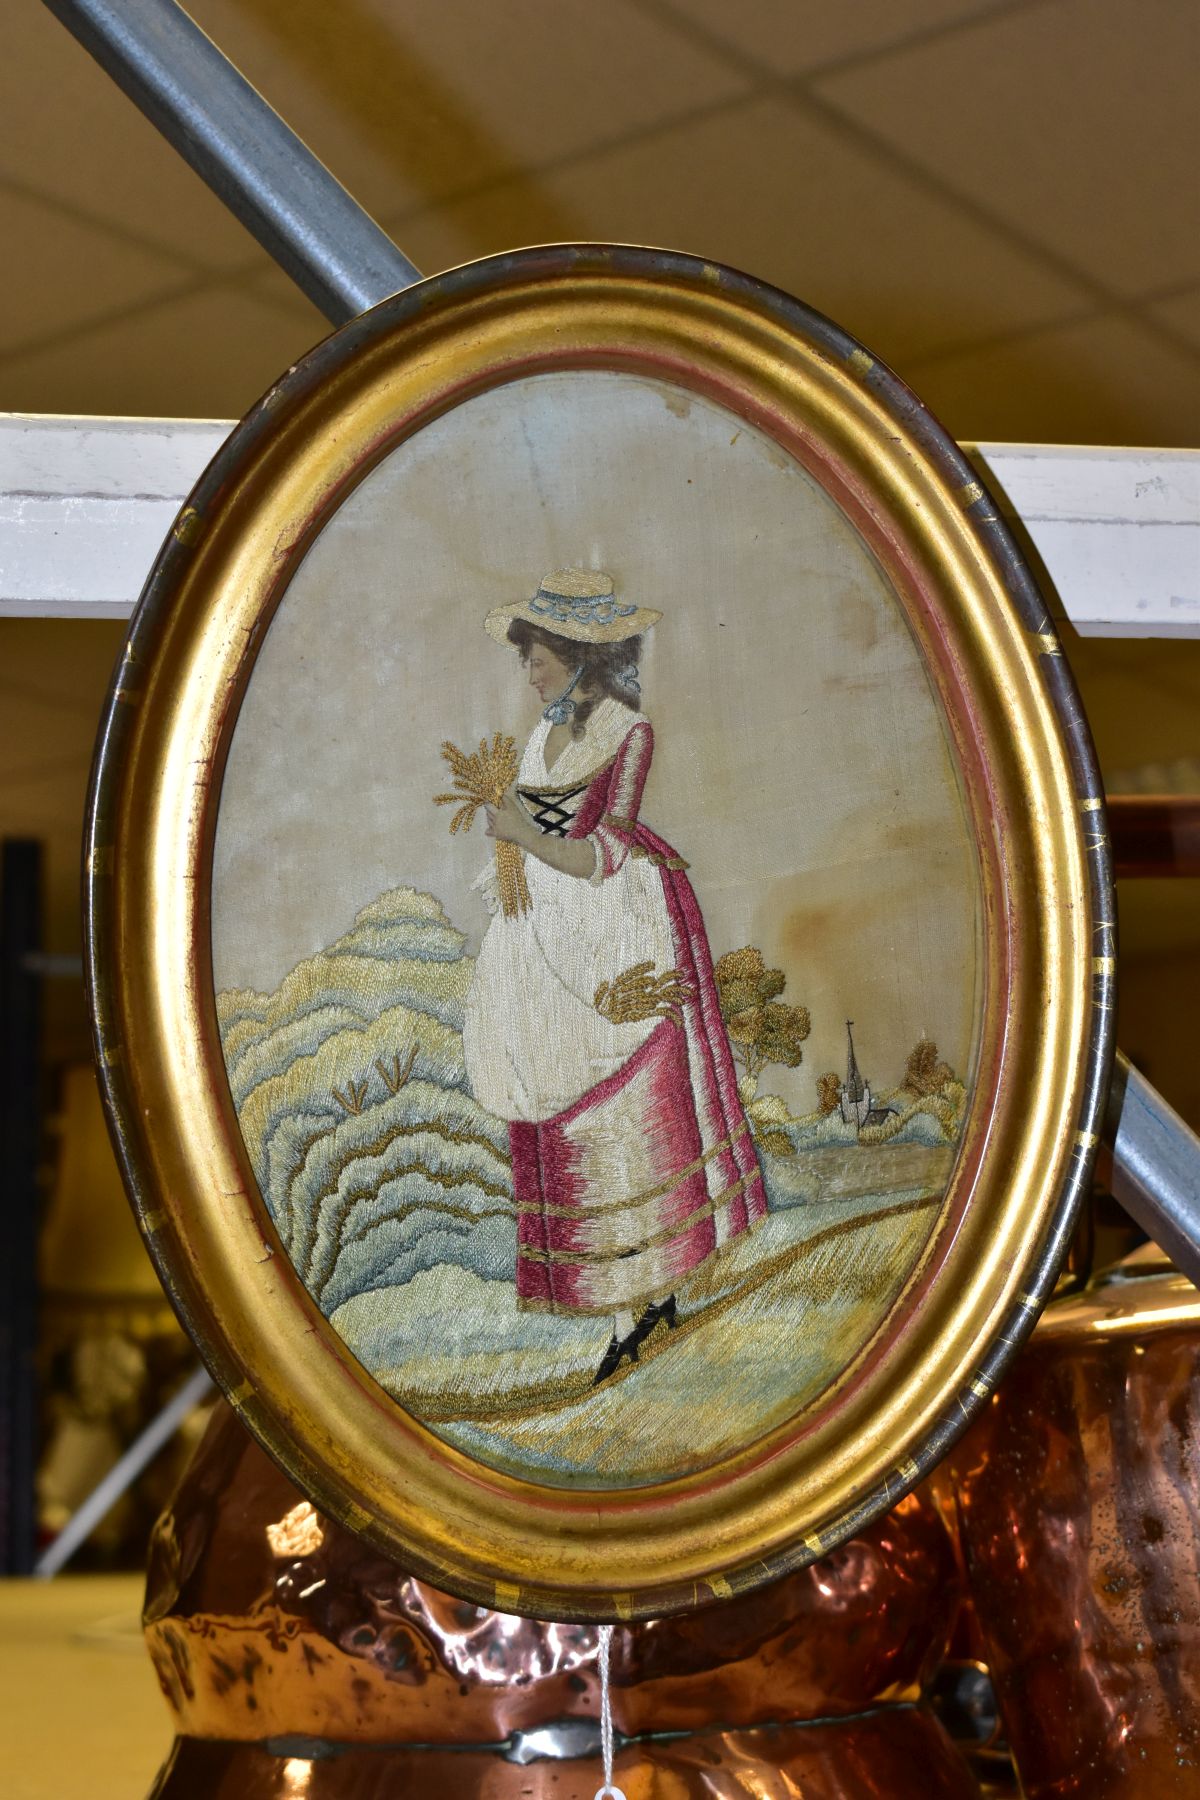 A LATE 18TH CENTURY EMBROIDERED SILKWORK PICTURE OF A LADY HARVESTING CORN, church to the